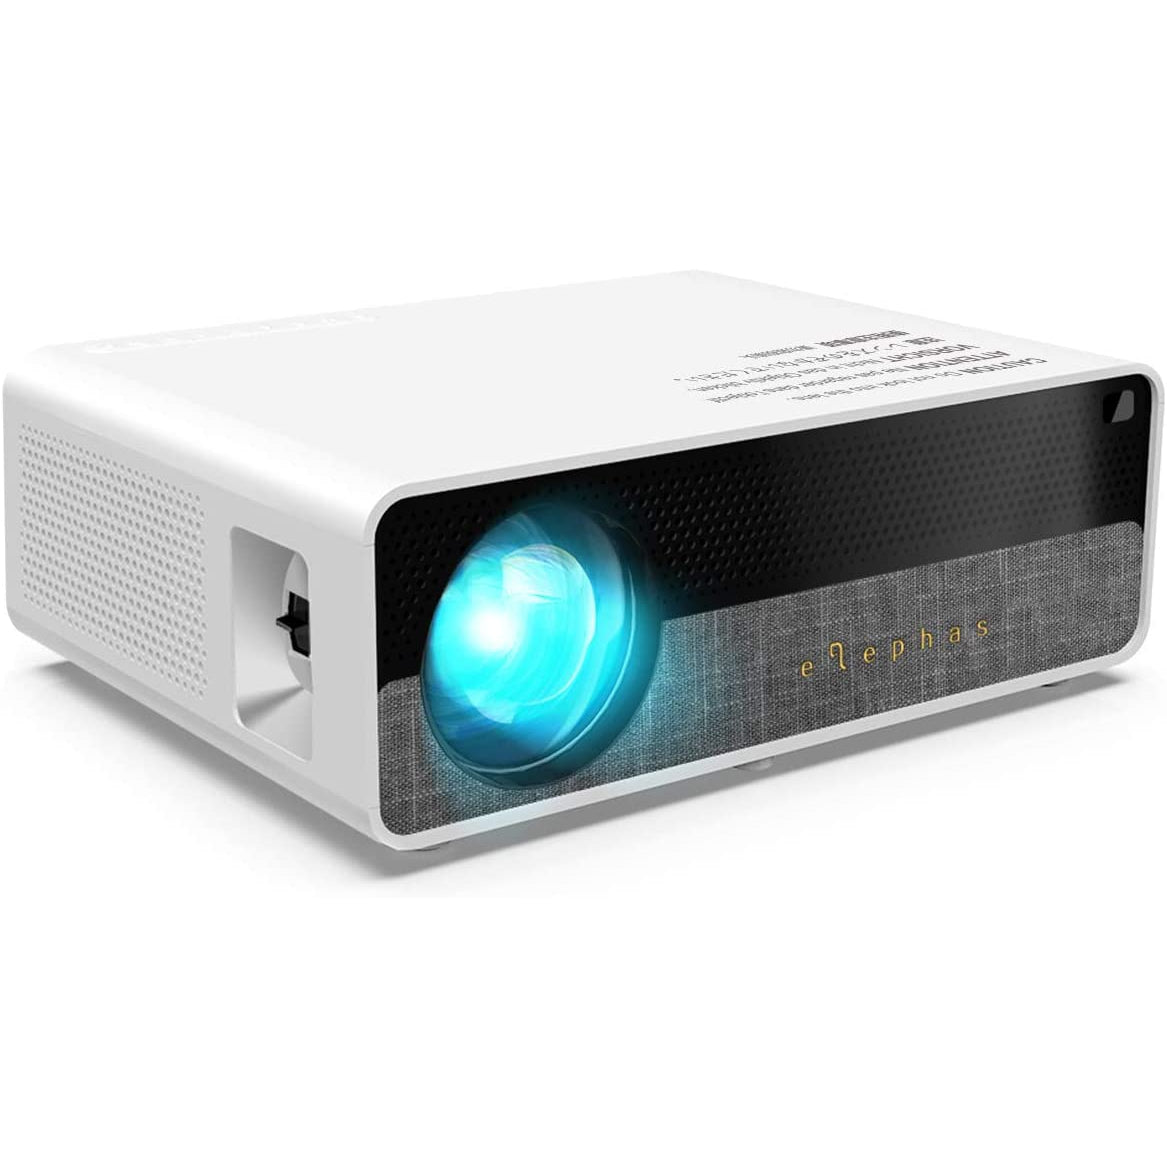 ELEPHAS Q9 Projector Native 1080P HD Video Projector Supports 2K, 6800 Lumens - White